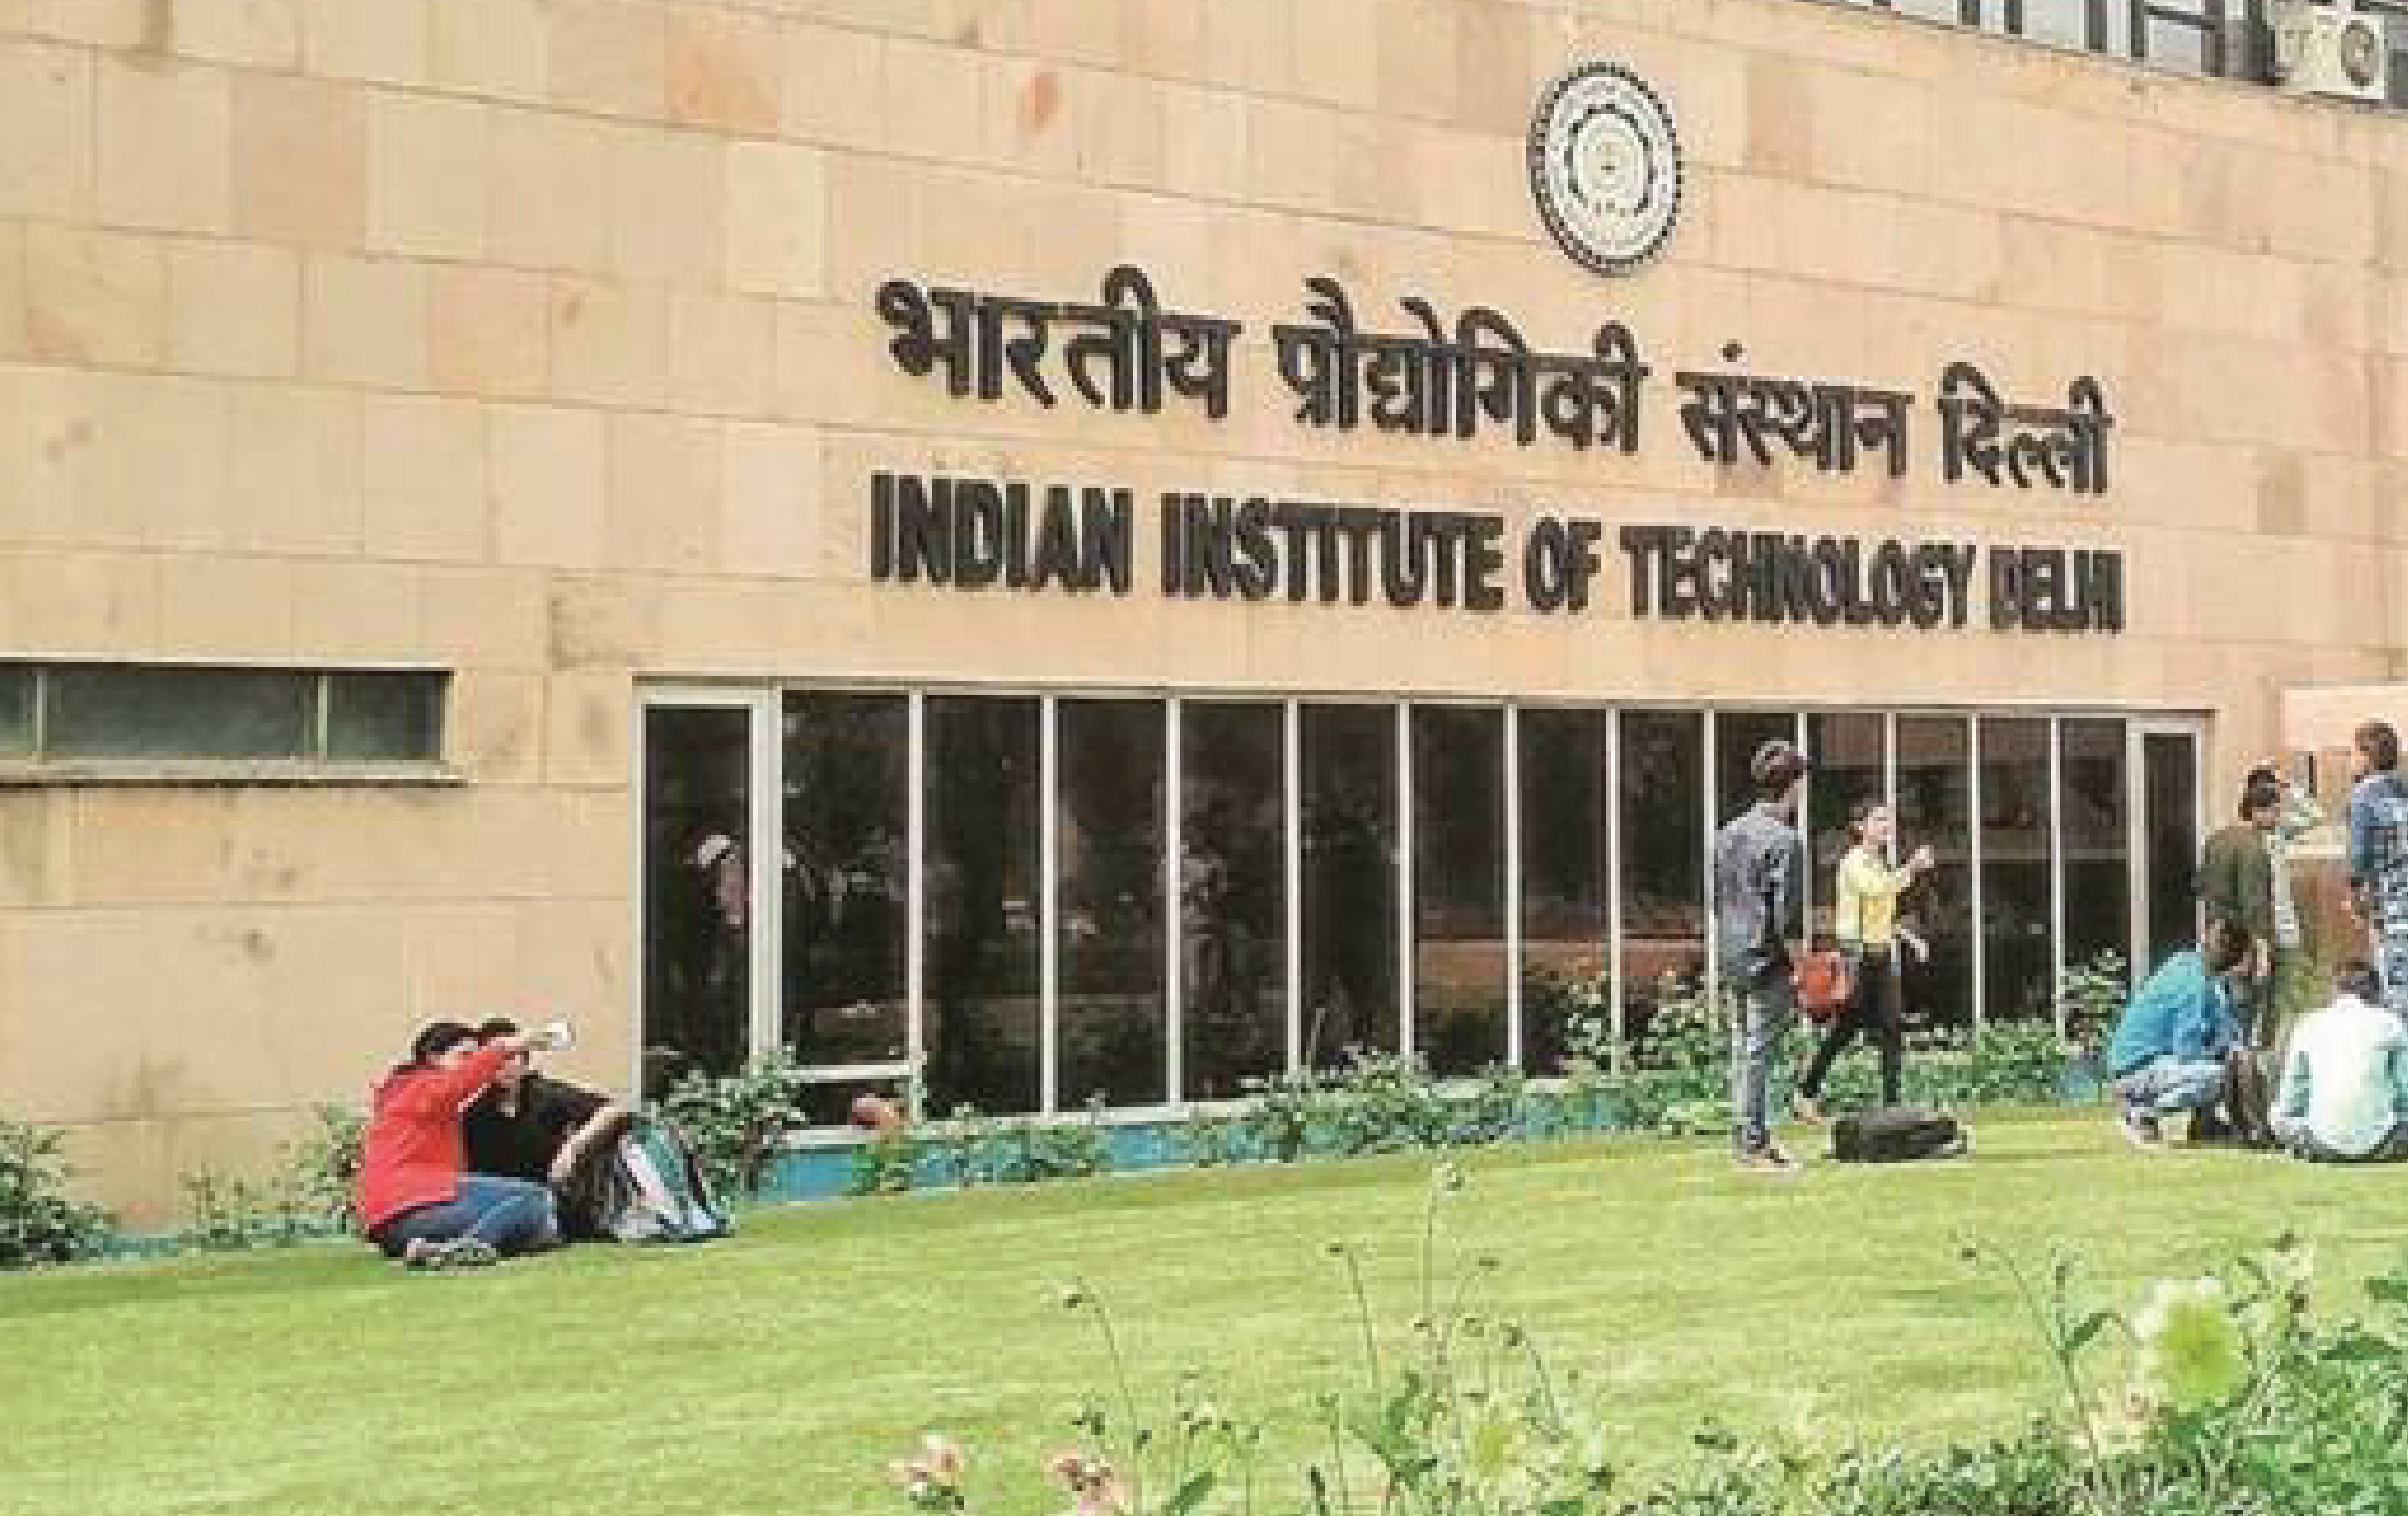 To bring IITs back on board UK agency behind Times World University Ranking changes criteria